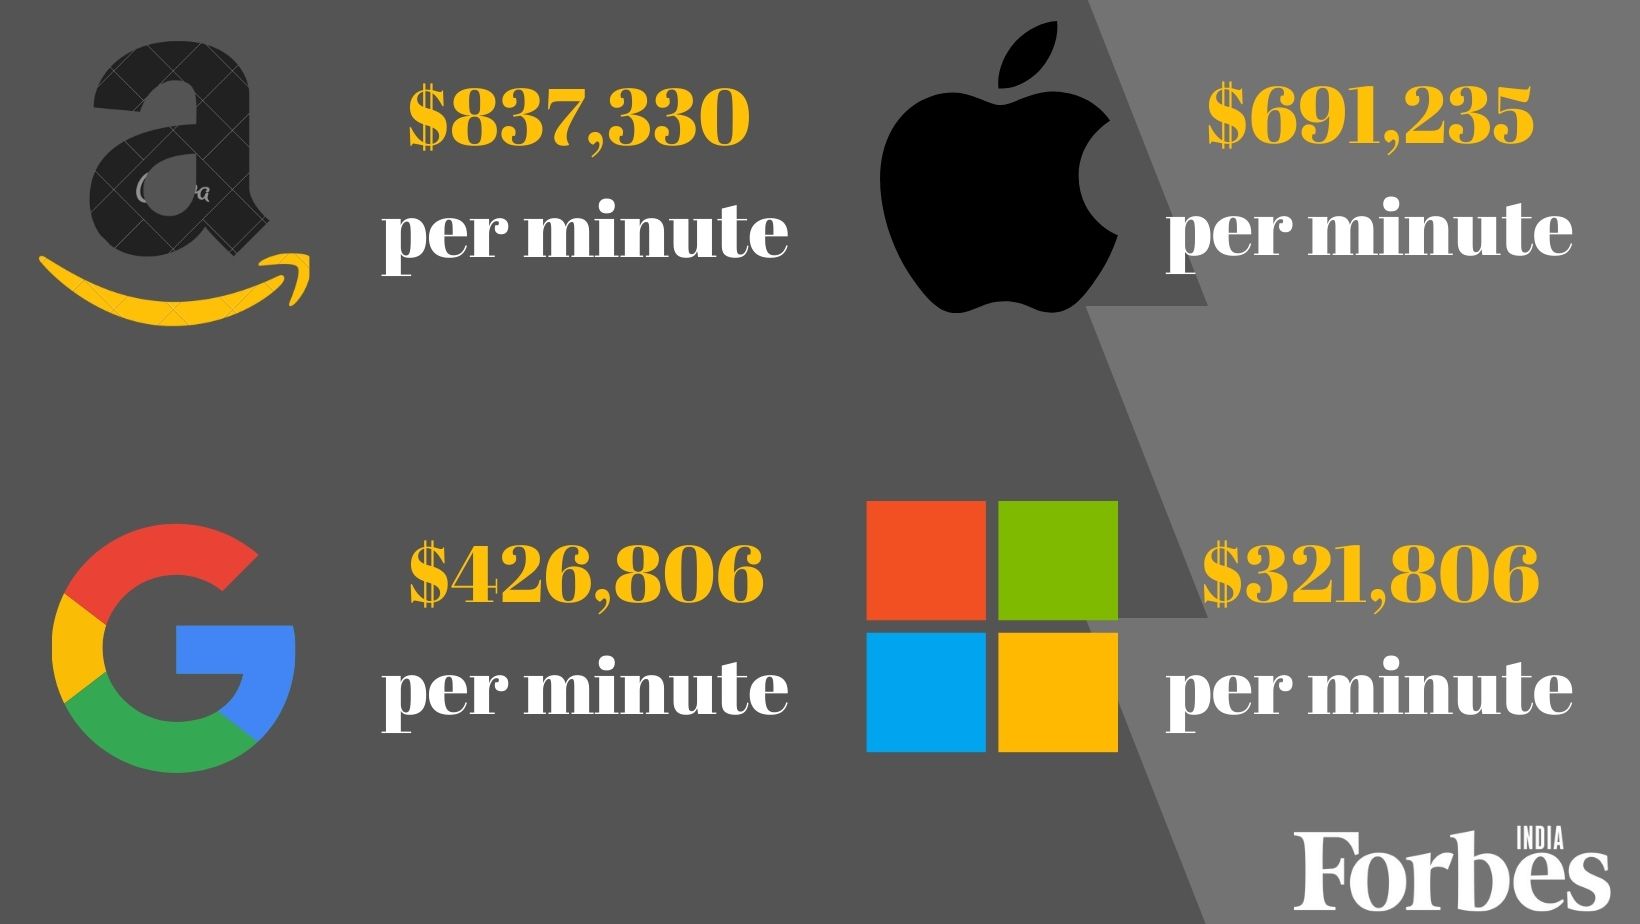 From Amazon to Netflix: Here's how much big tech companies earn per minute